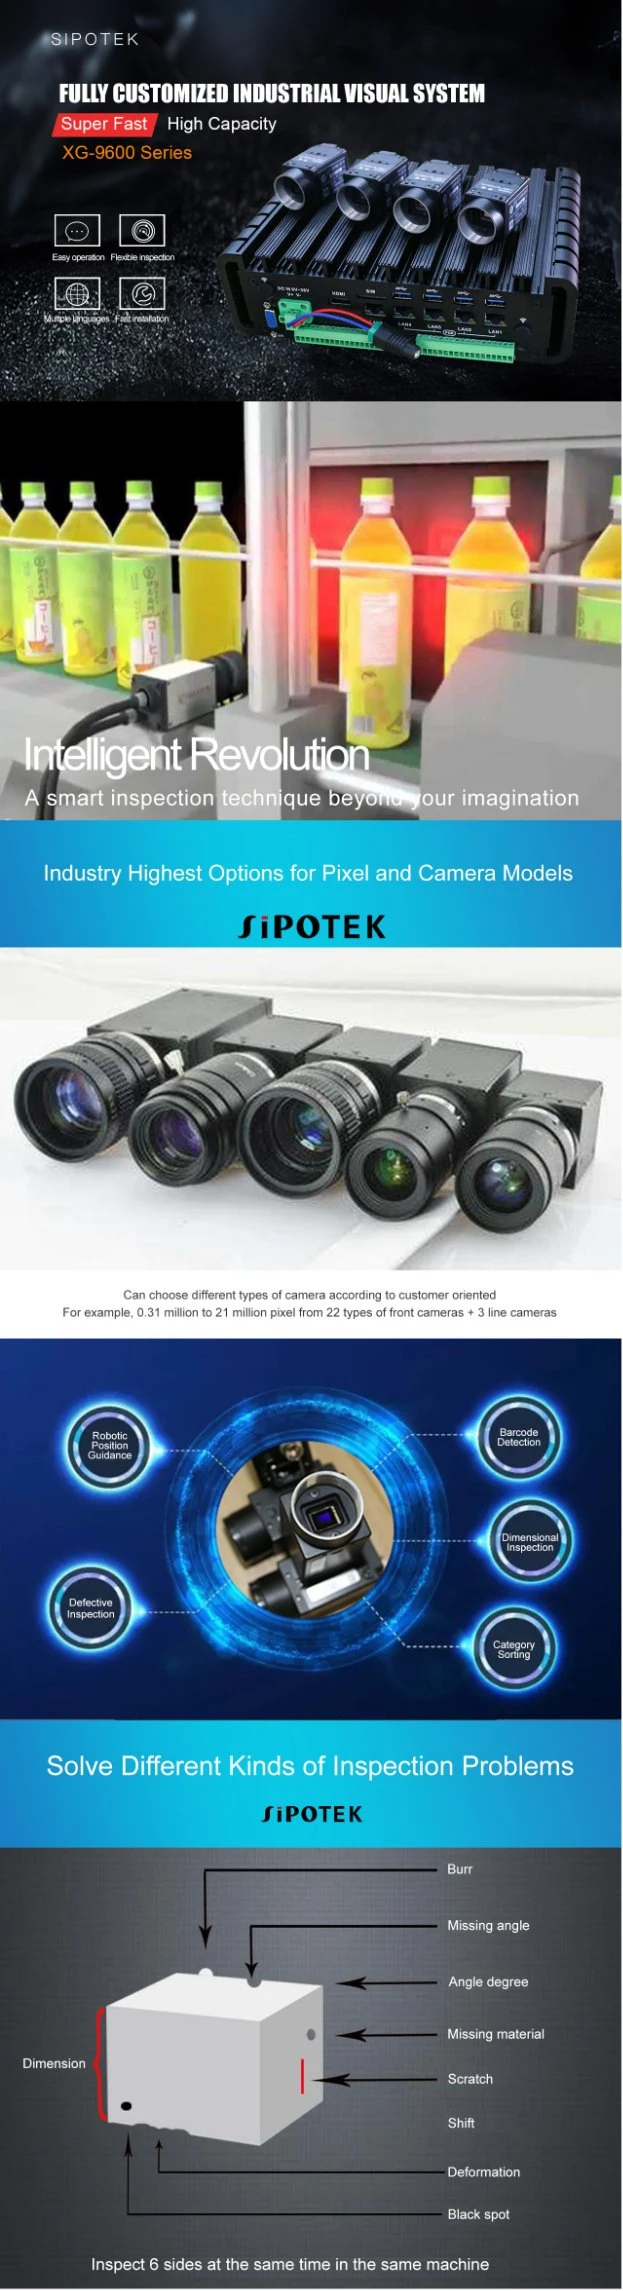 Sipotek Aoi Machine Vision System for Quantity Counting